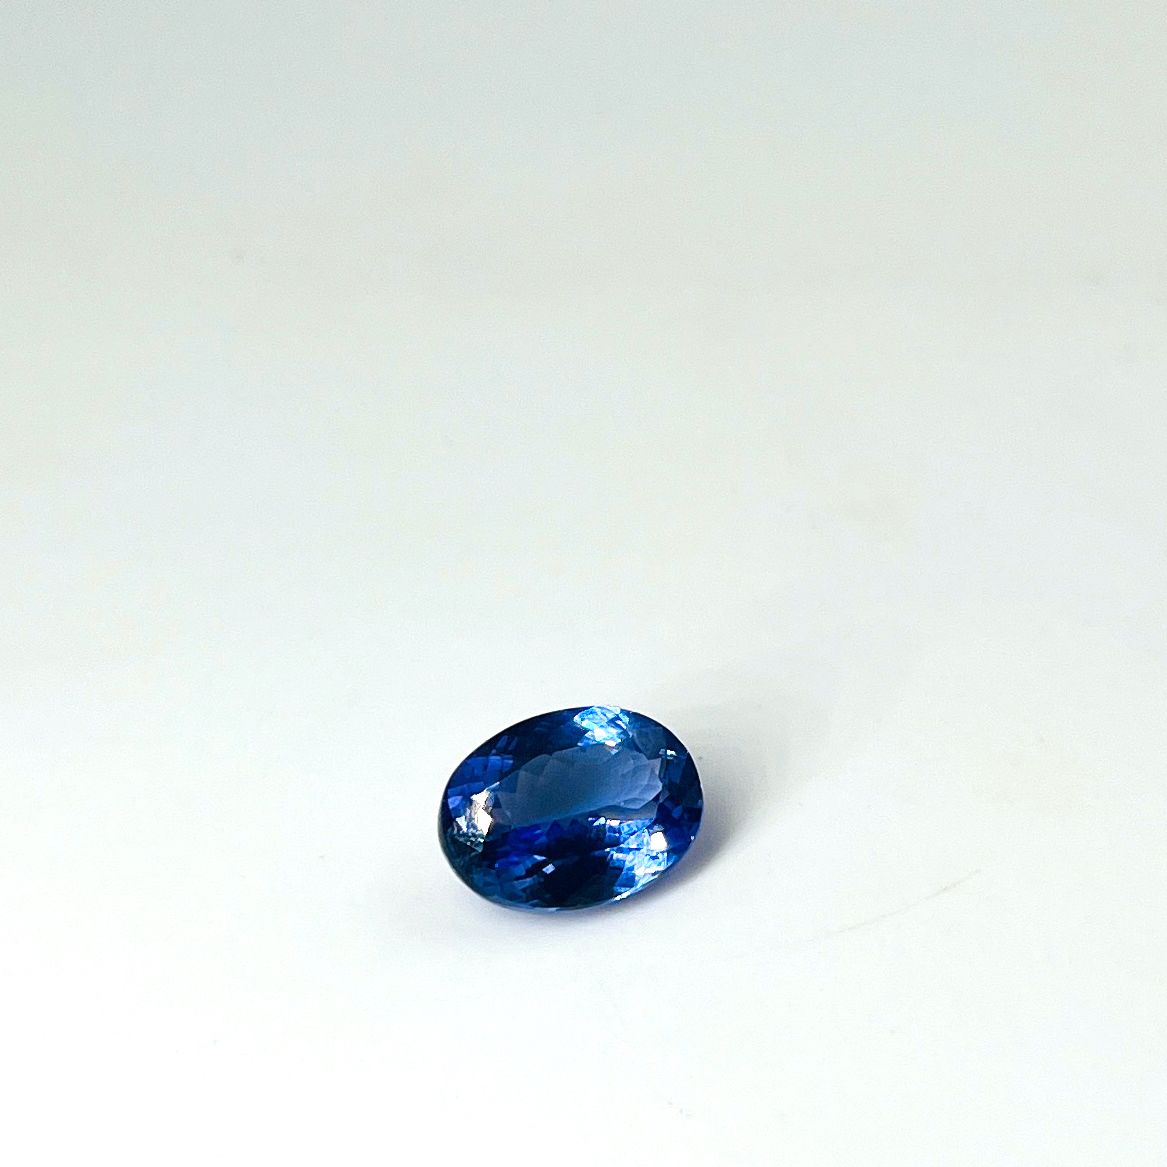 Null Oval Tanzanite weighing 7.05 cts. Accompanied by an AIG certificate.